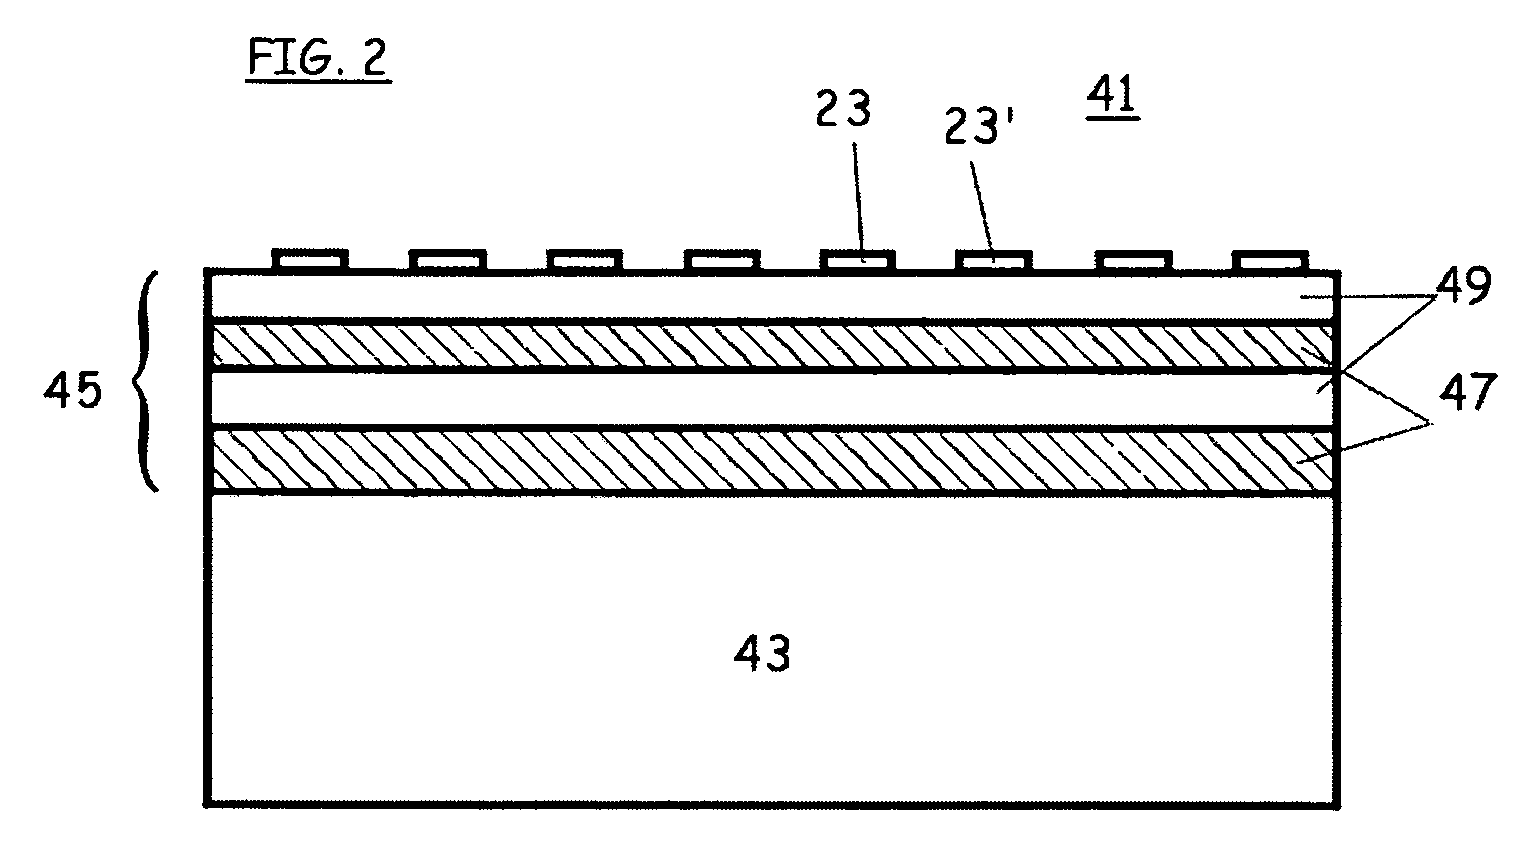 Optical device for surface-generated fluorescence